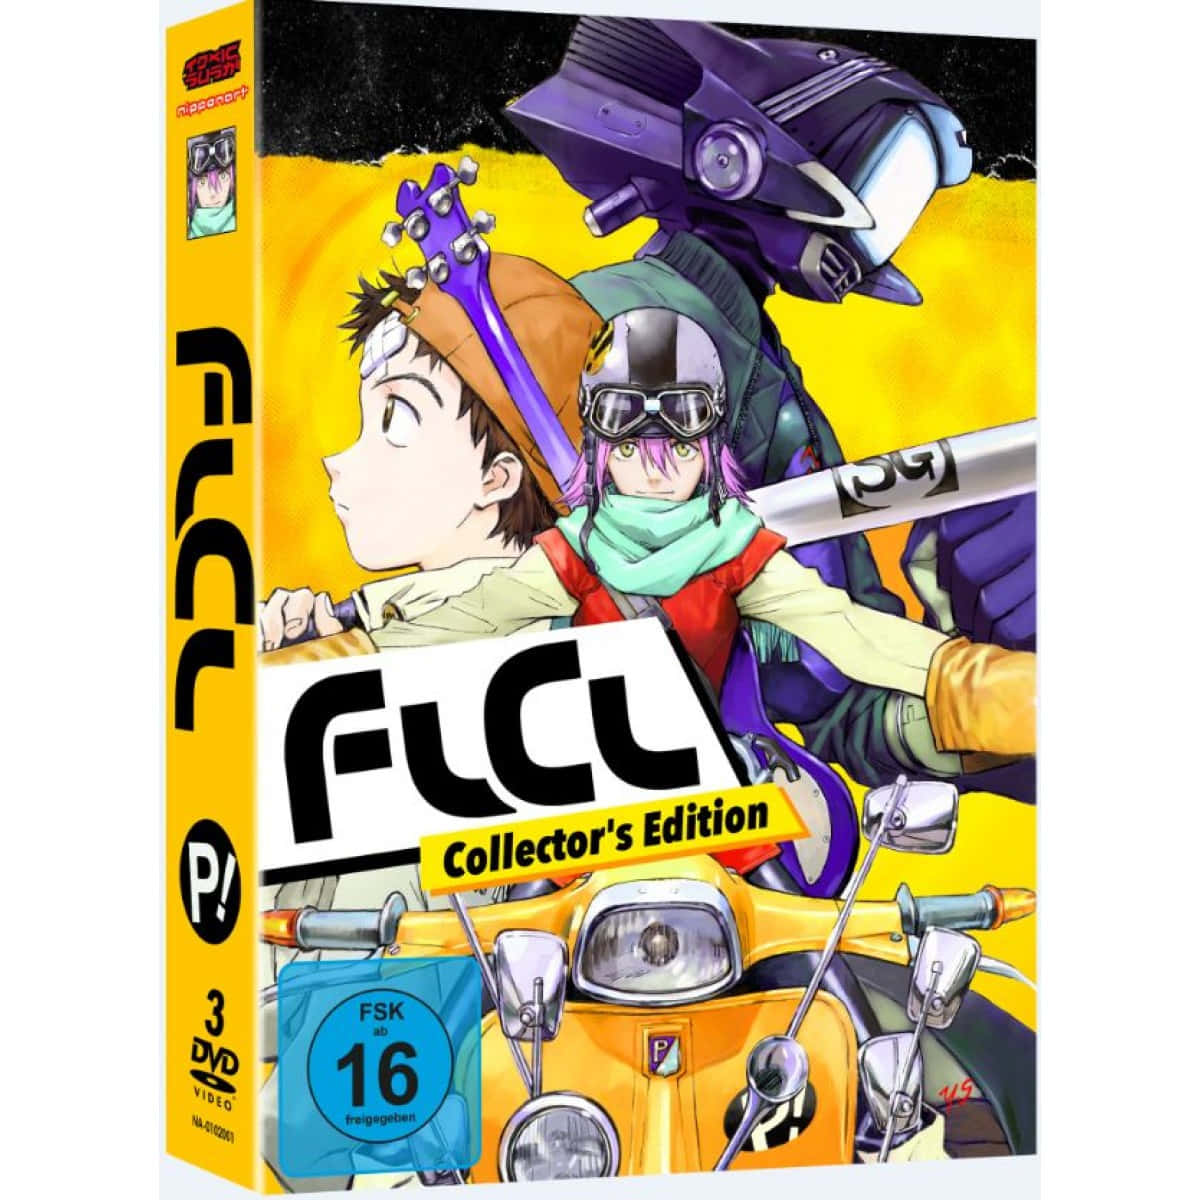 "Fight for Freedom with FLCL"